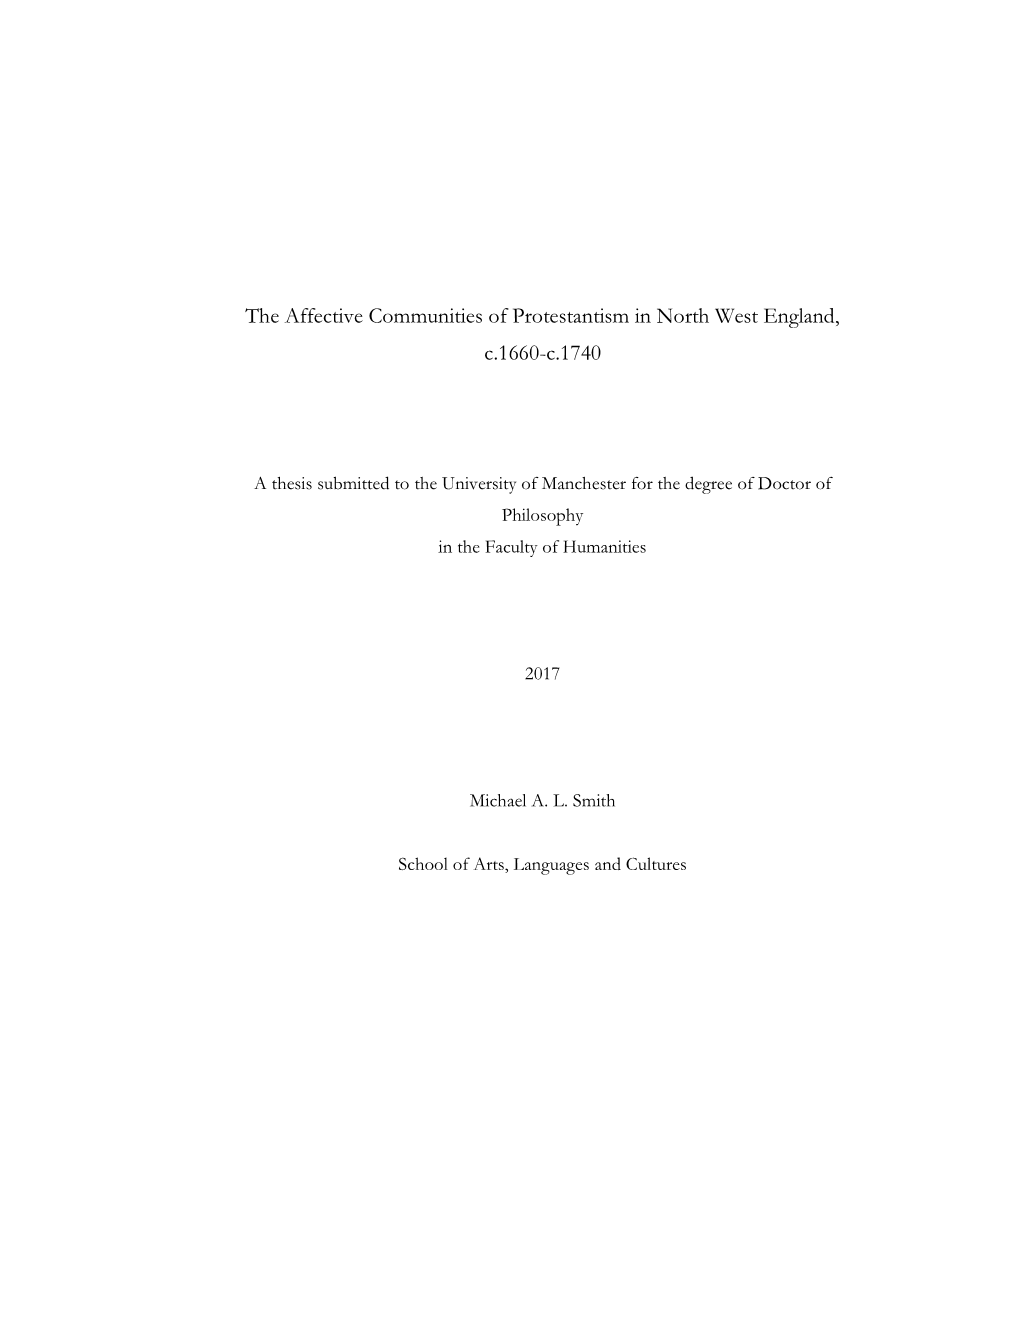 The Affective Communities of Protestantism in North West England, C.1660-C.1740